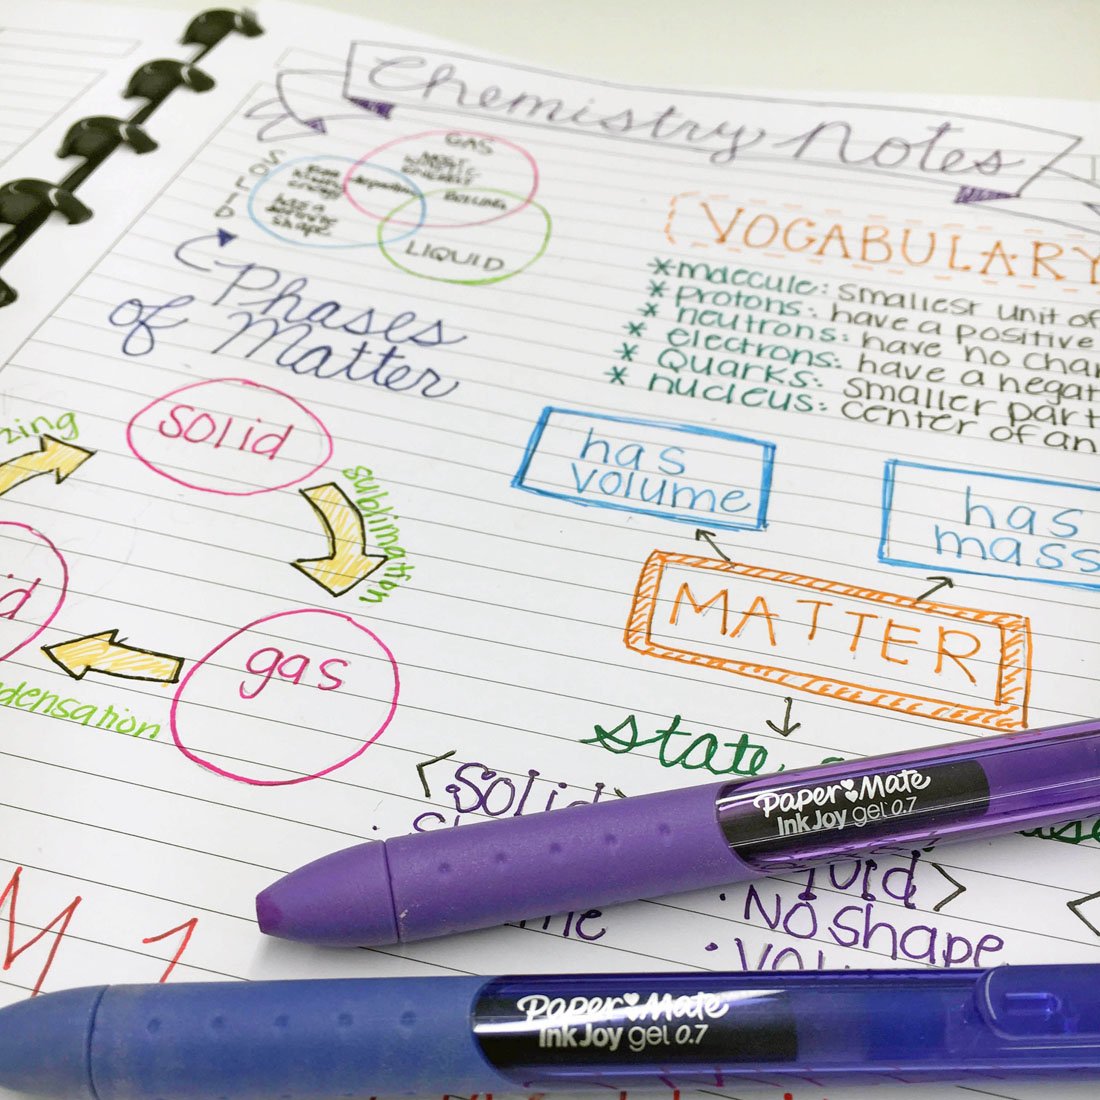 Doodle Your Way to Better Notes